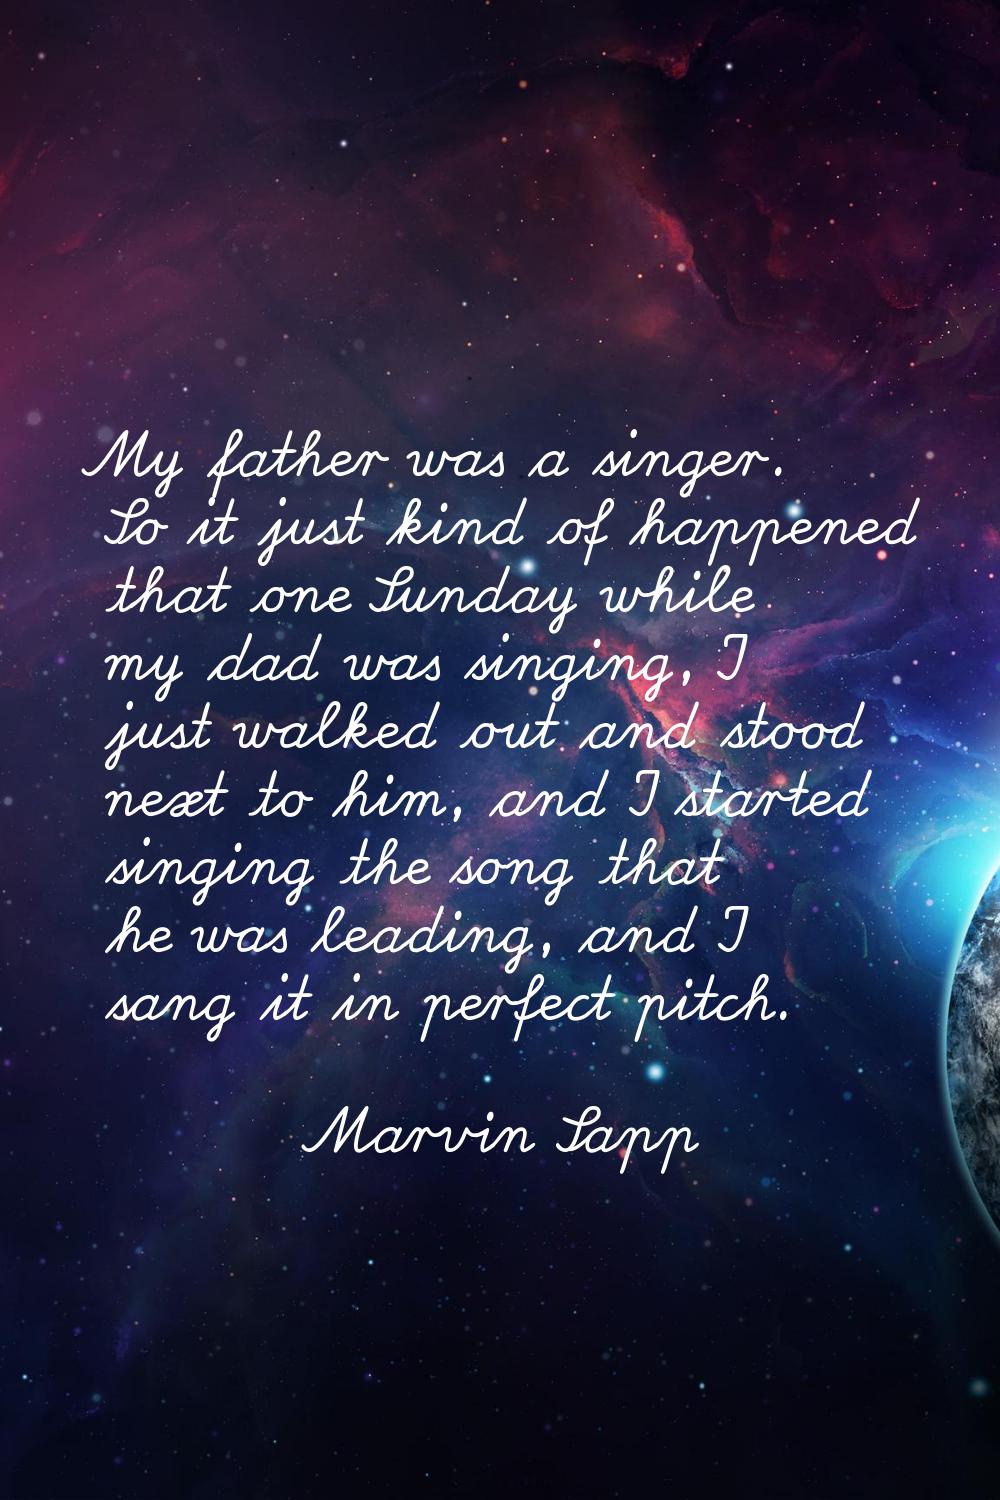 My father was a singer. So it just kind of happened that one Sunday while my dad was singing, I jus